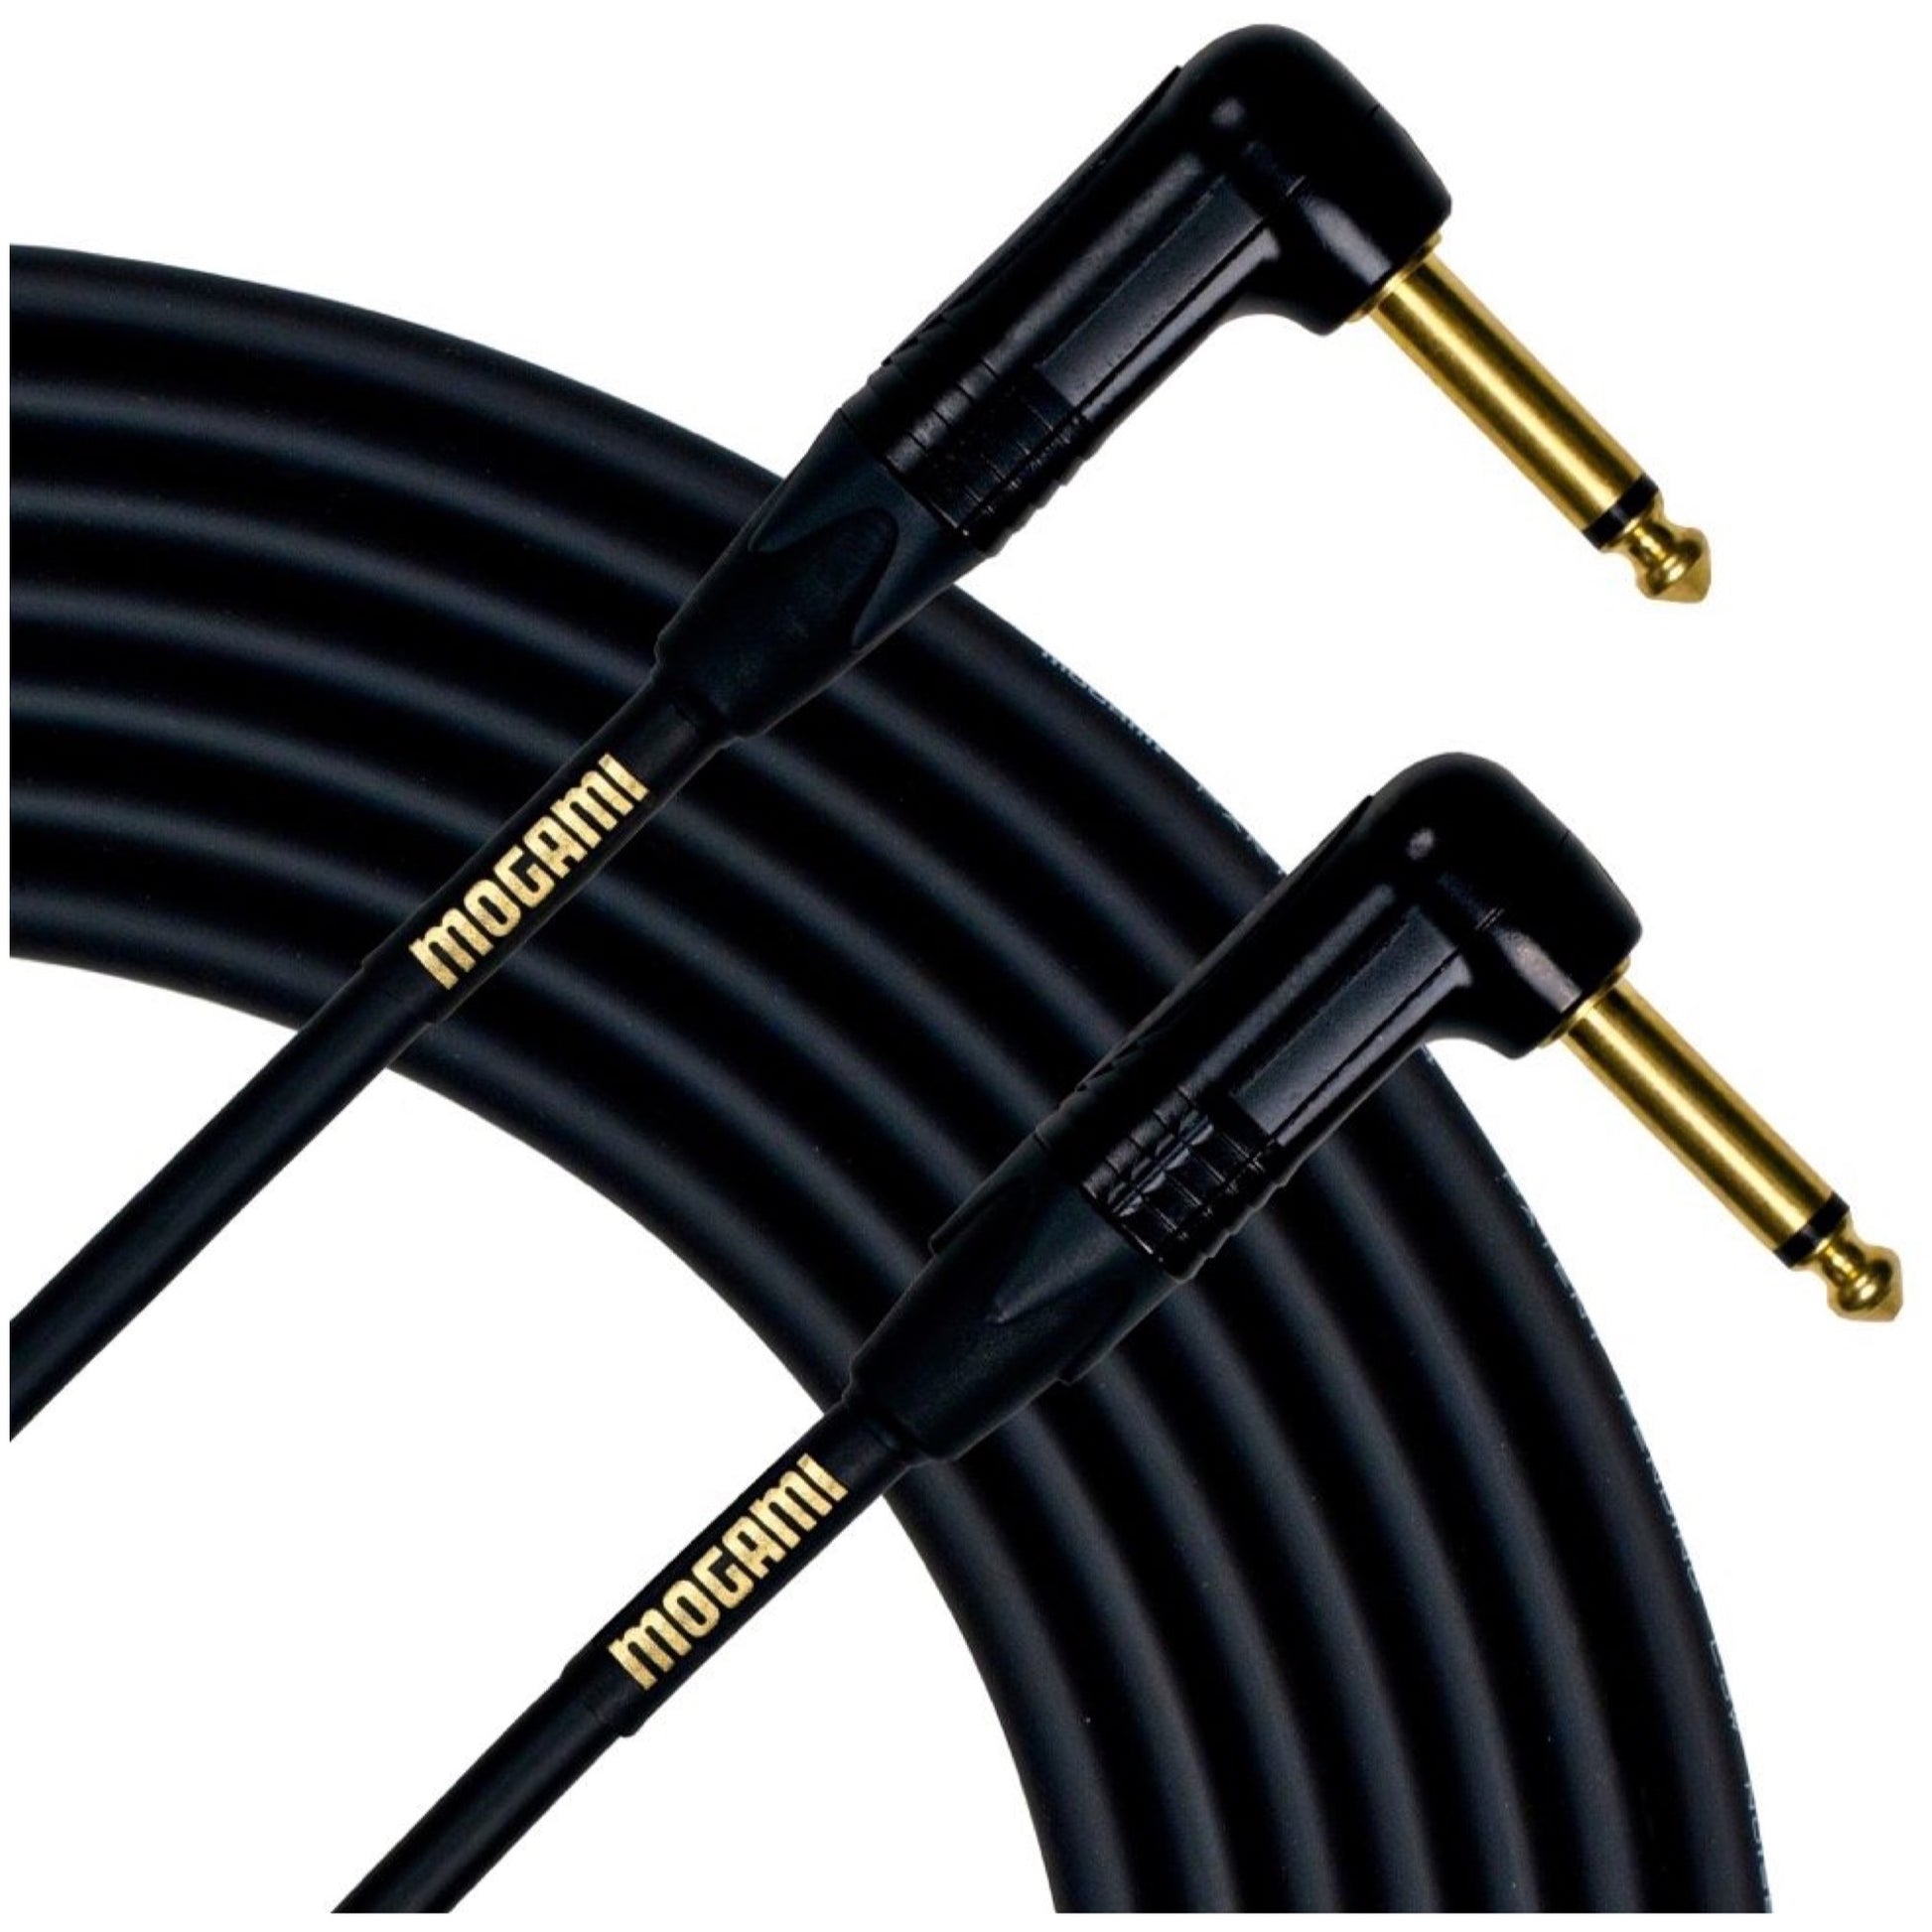 Mogami Gold Instrument Cable with Right Angle Ends, 10 Foot